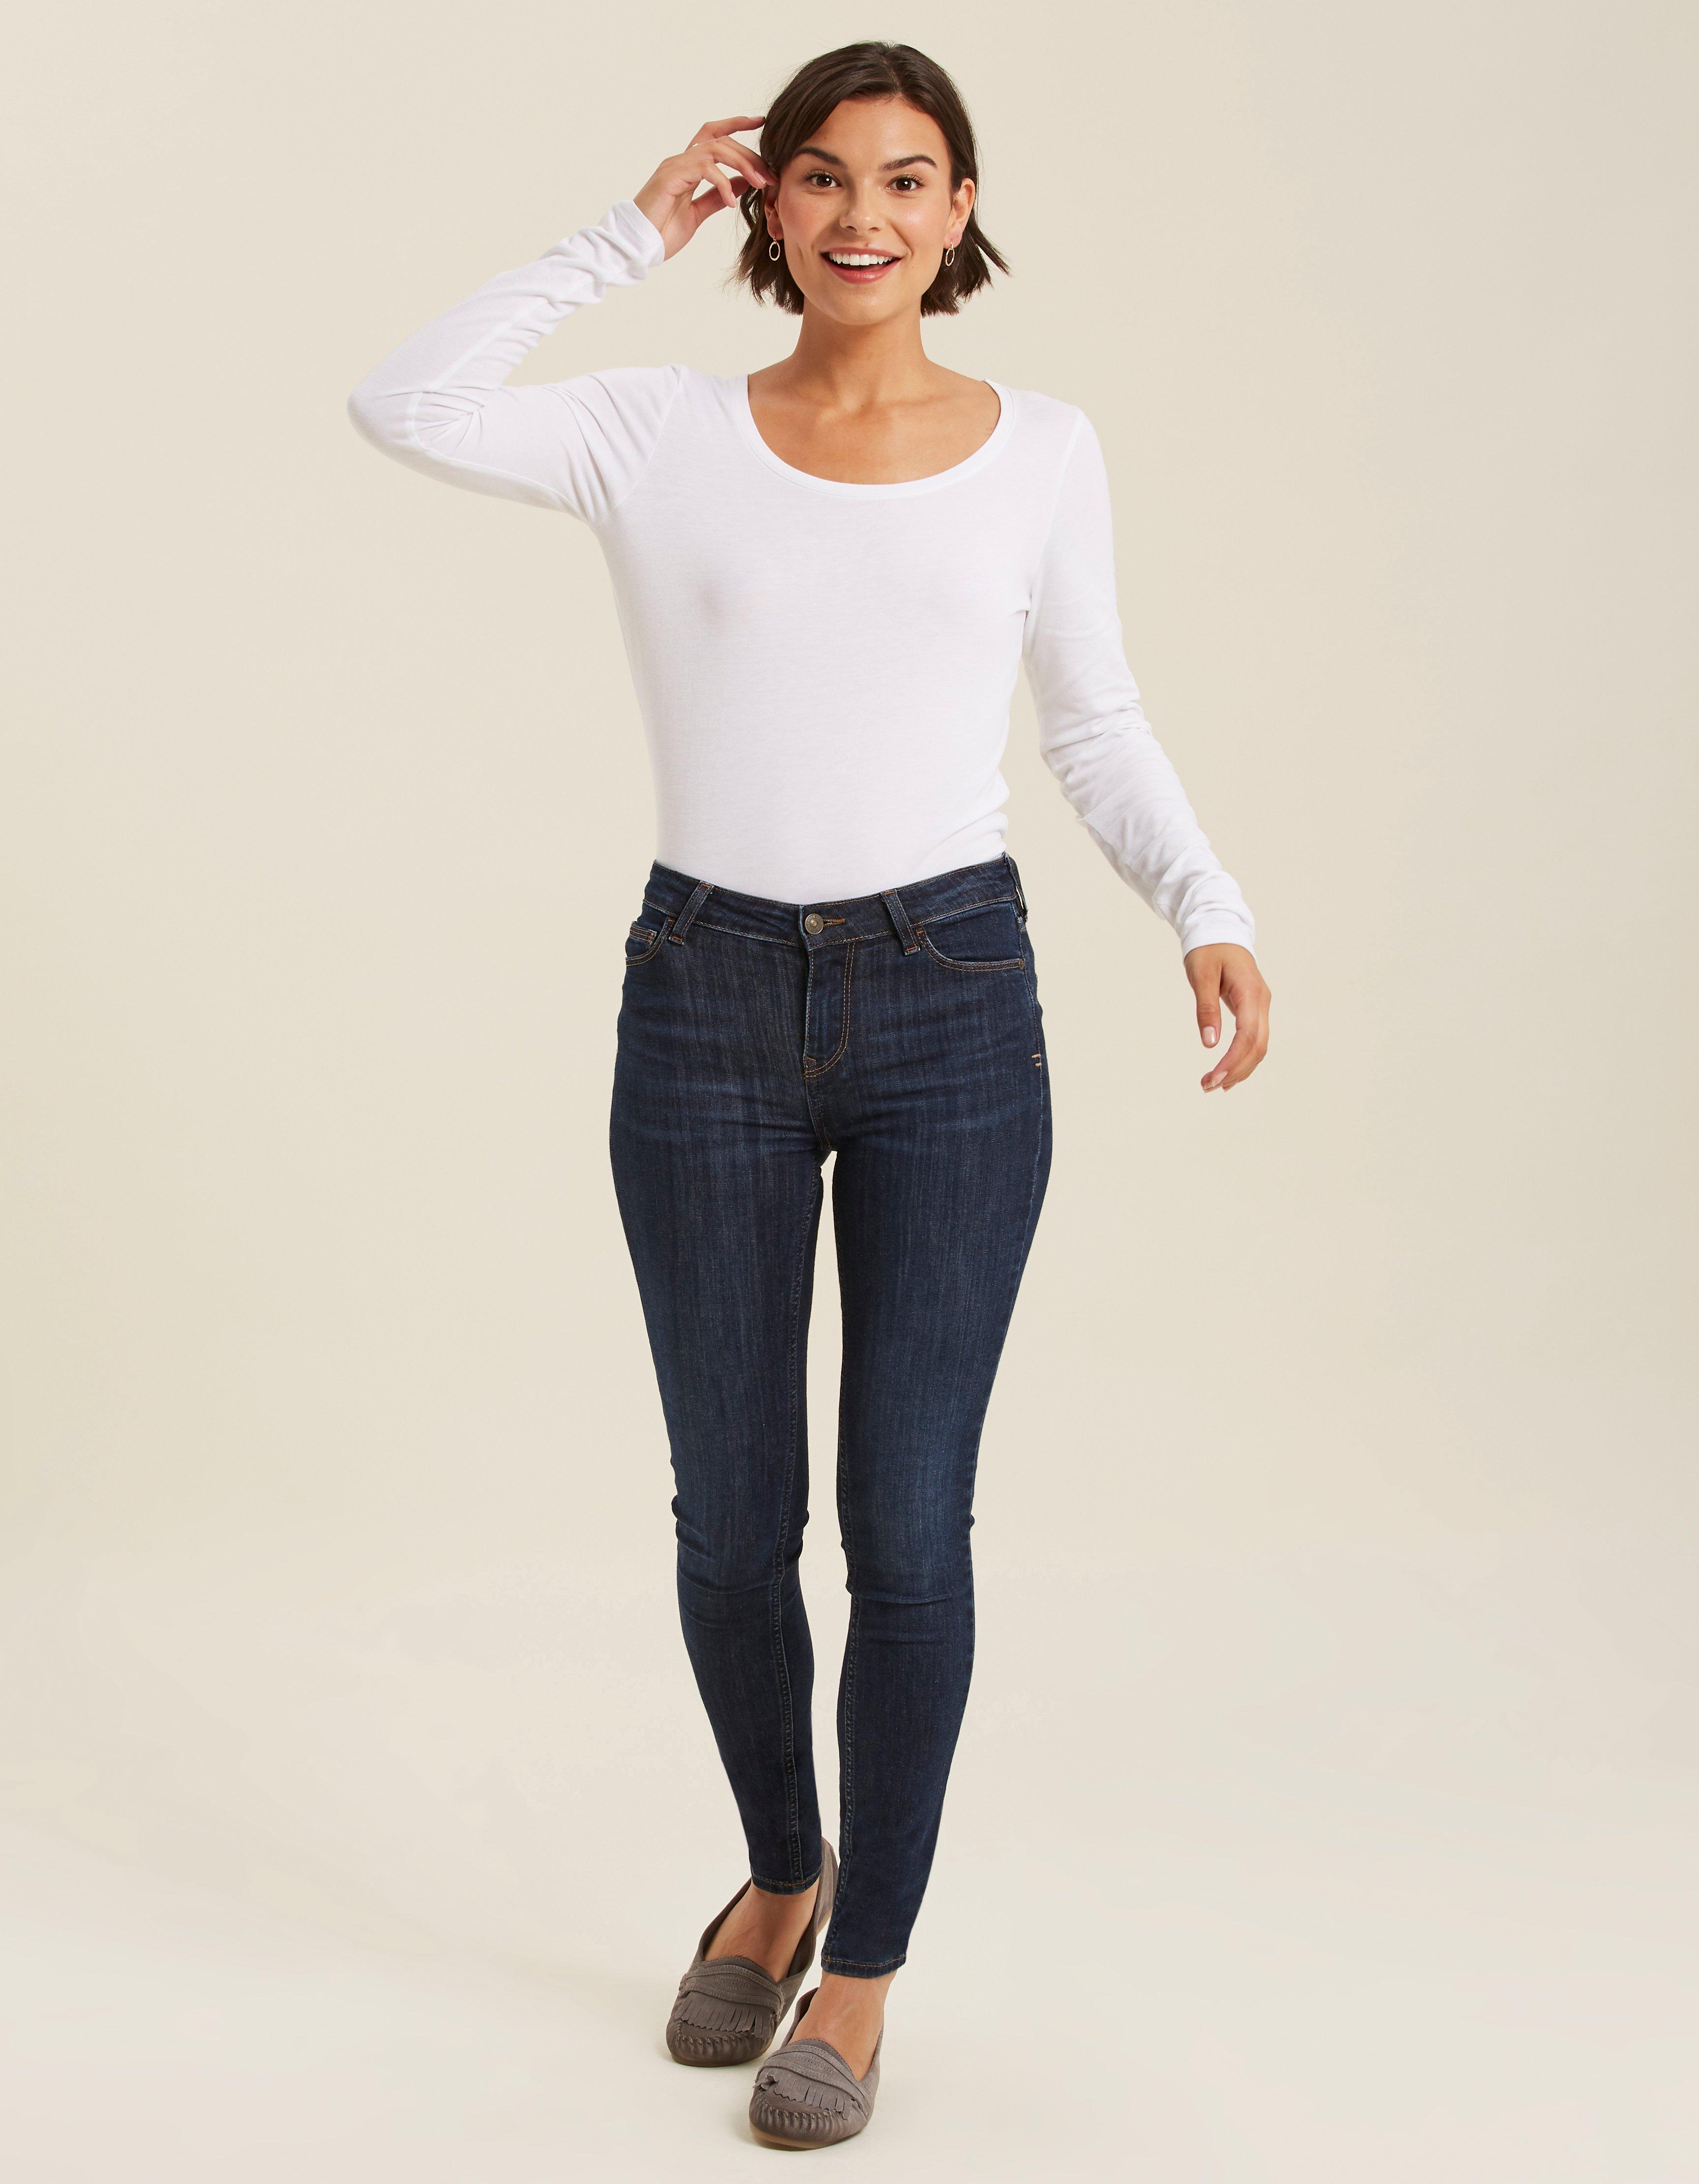 Harlow High Waist Super Skinny Jeggings, Jeans & Dungarees